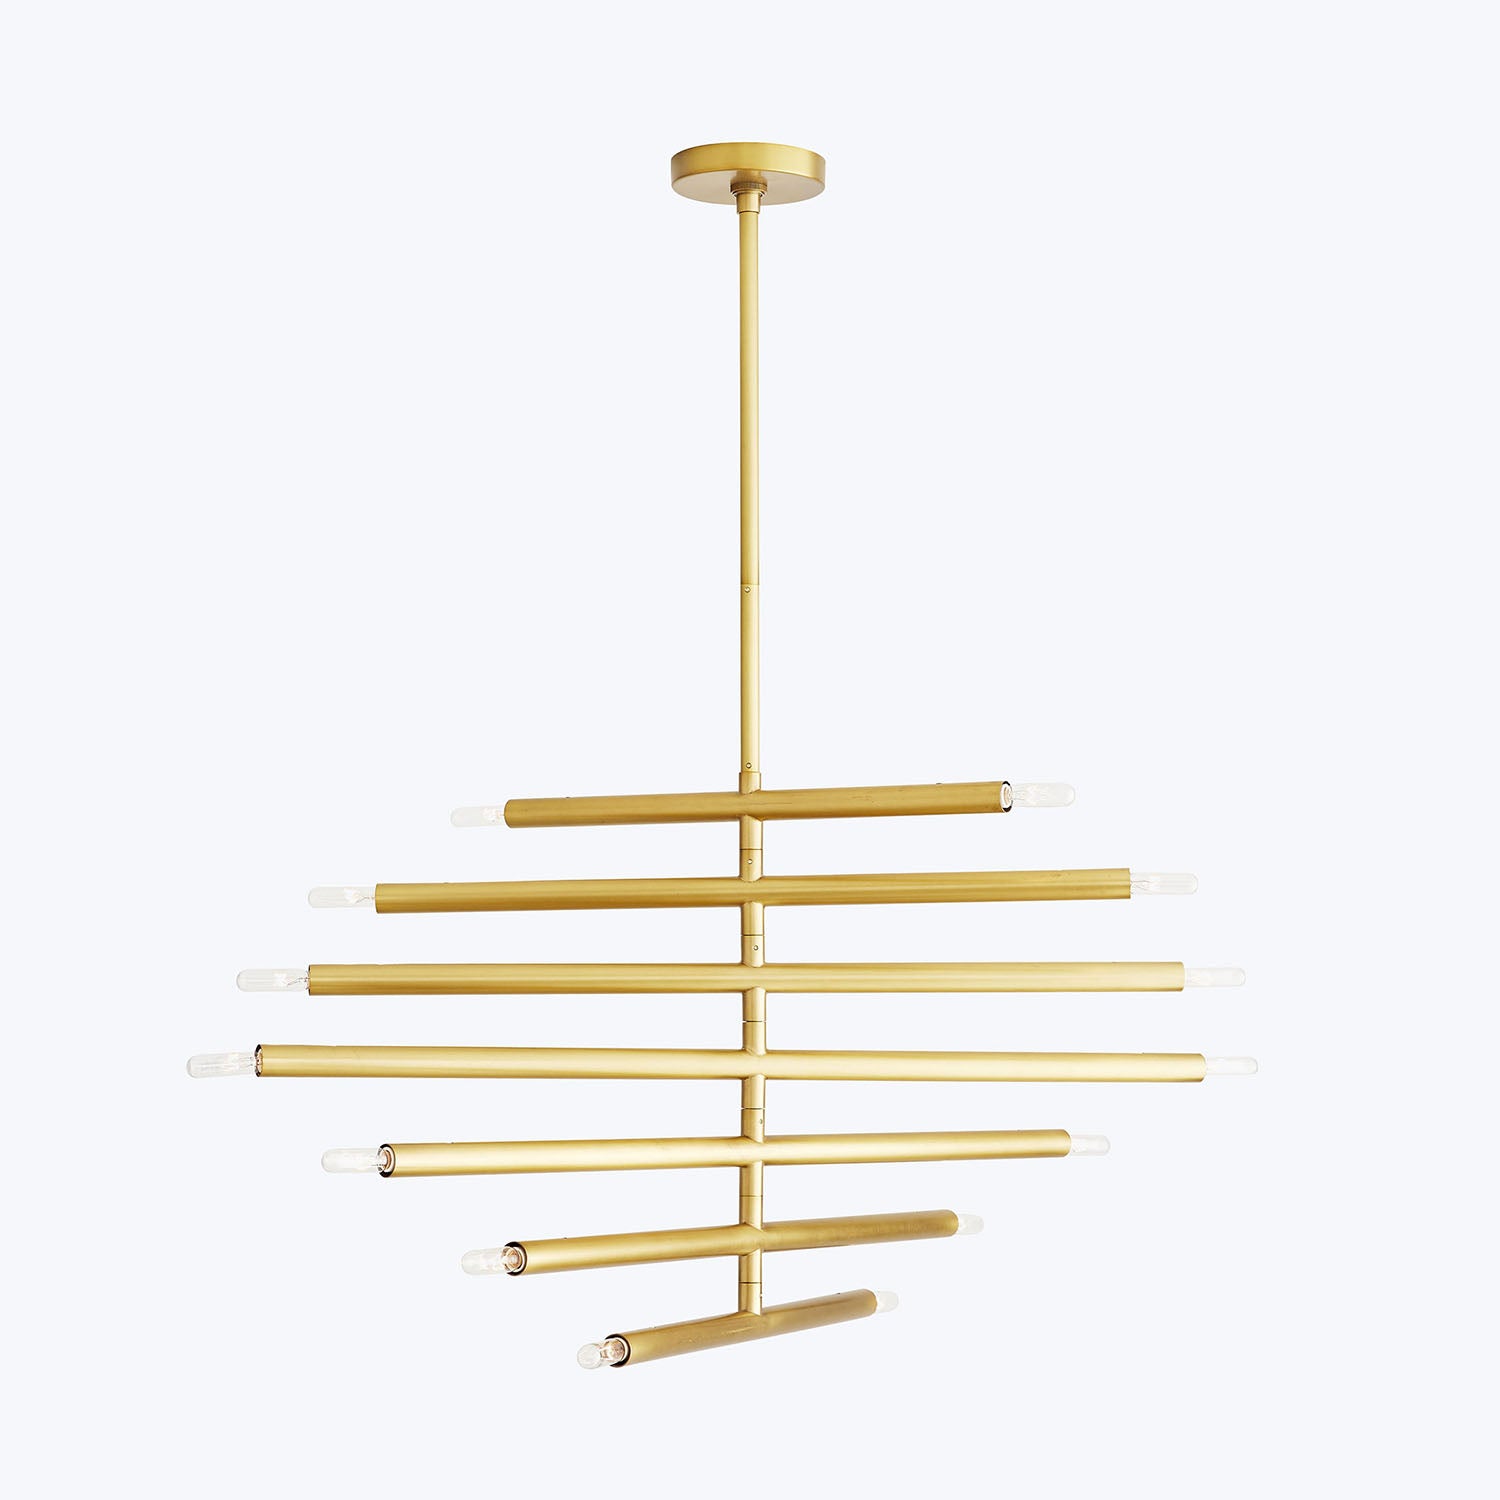 Contemporary tiered chandelier with sleek cylindrical light sources and minimalist design.